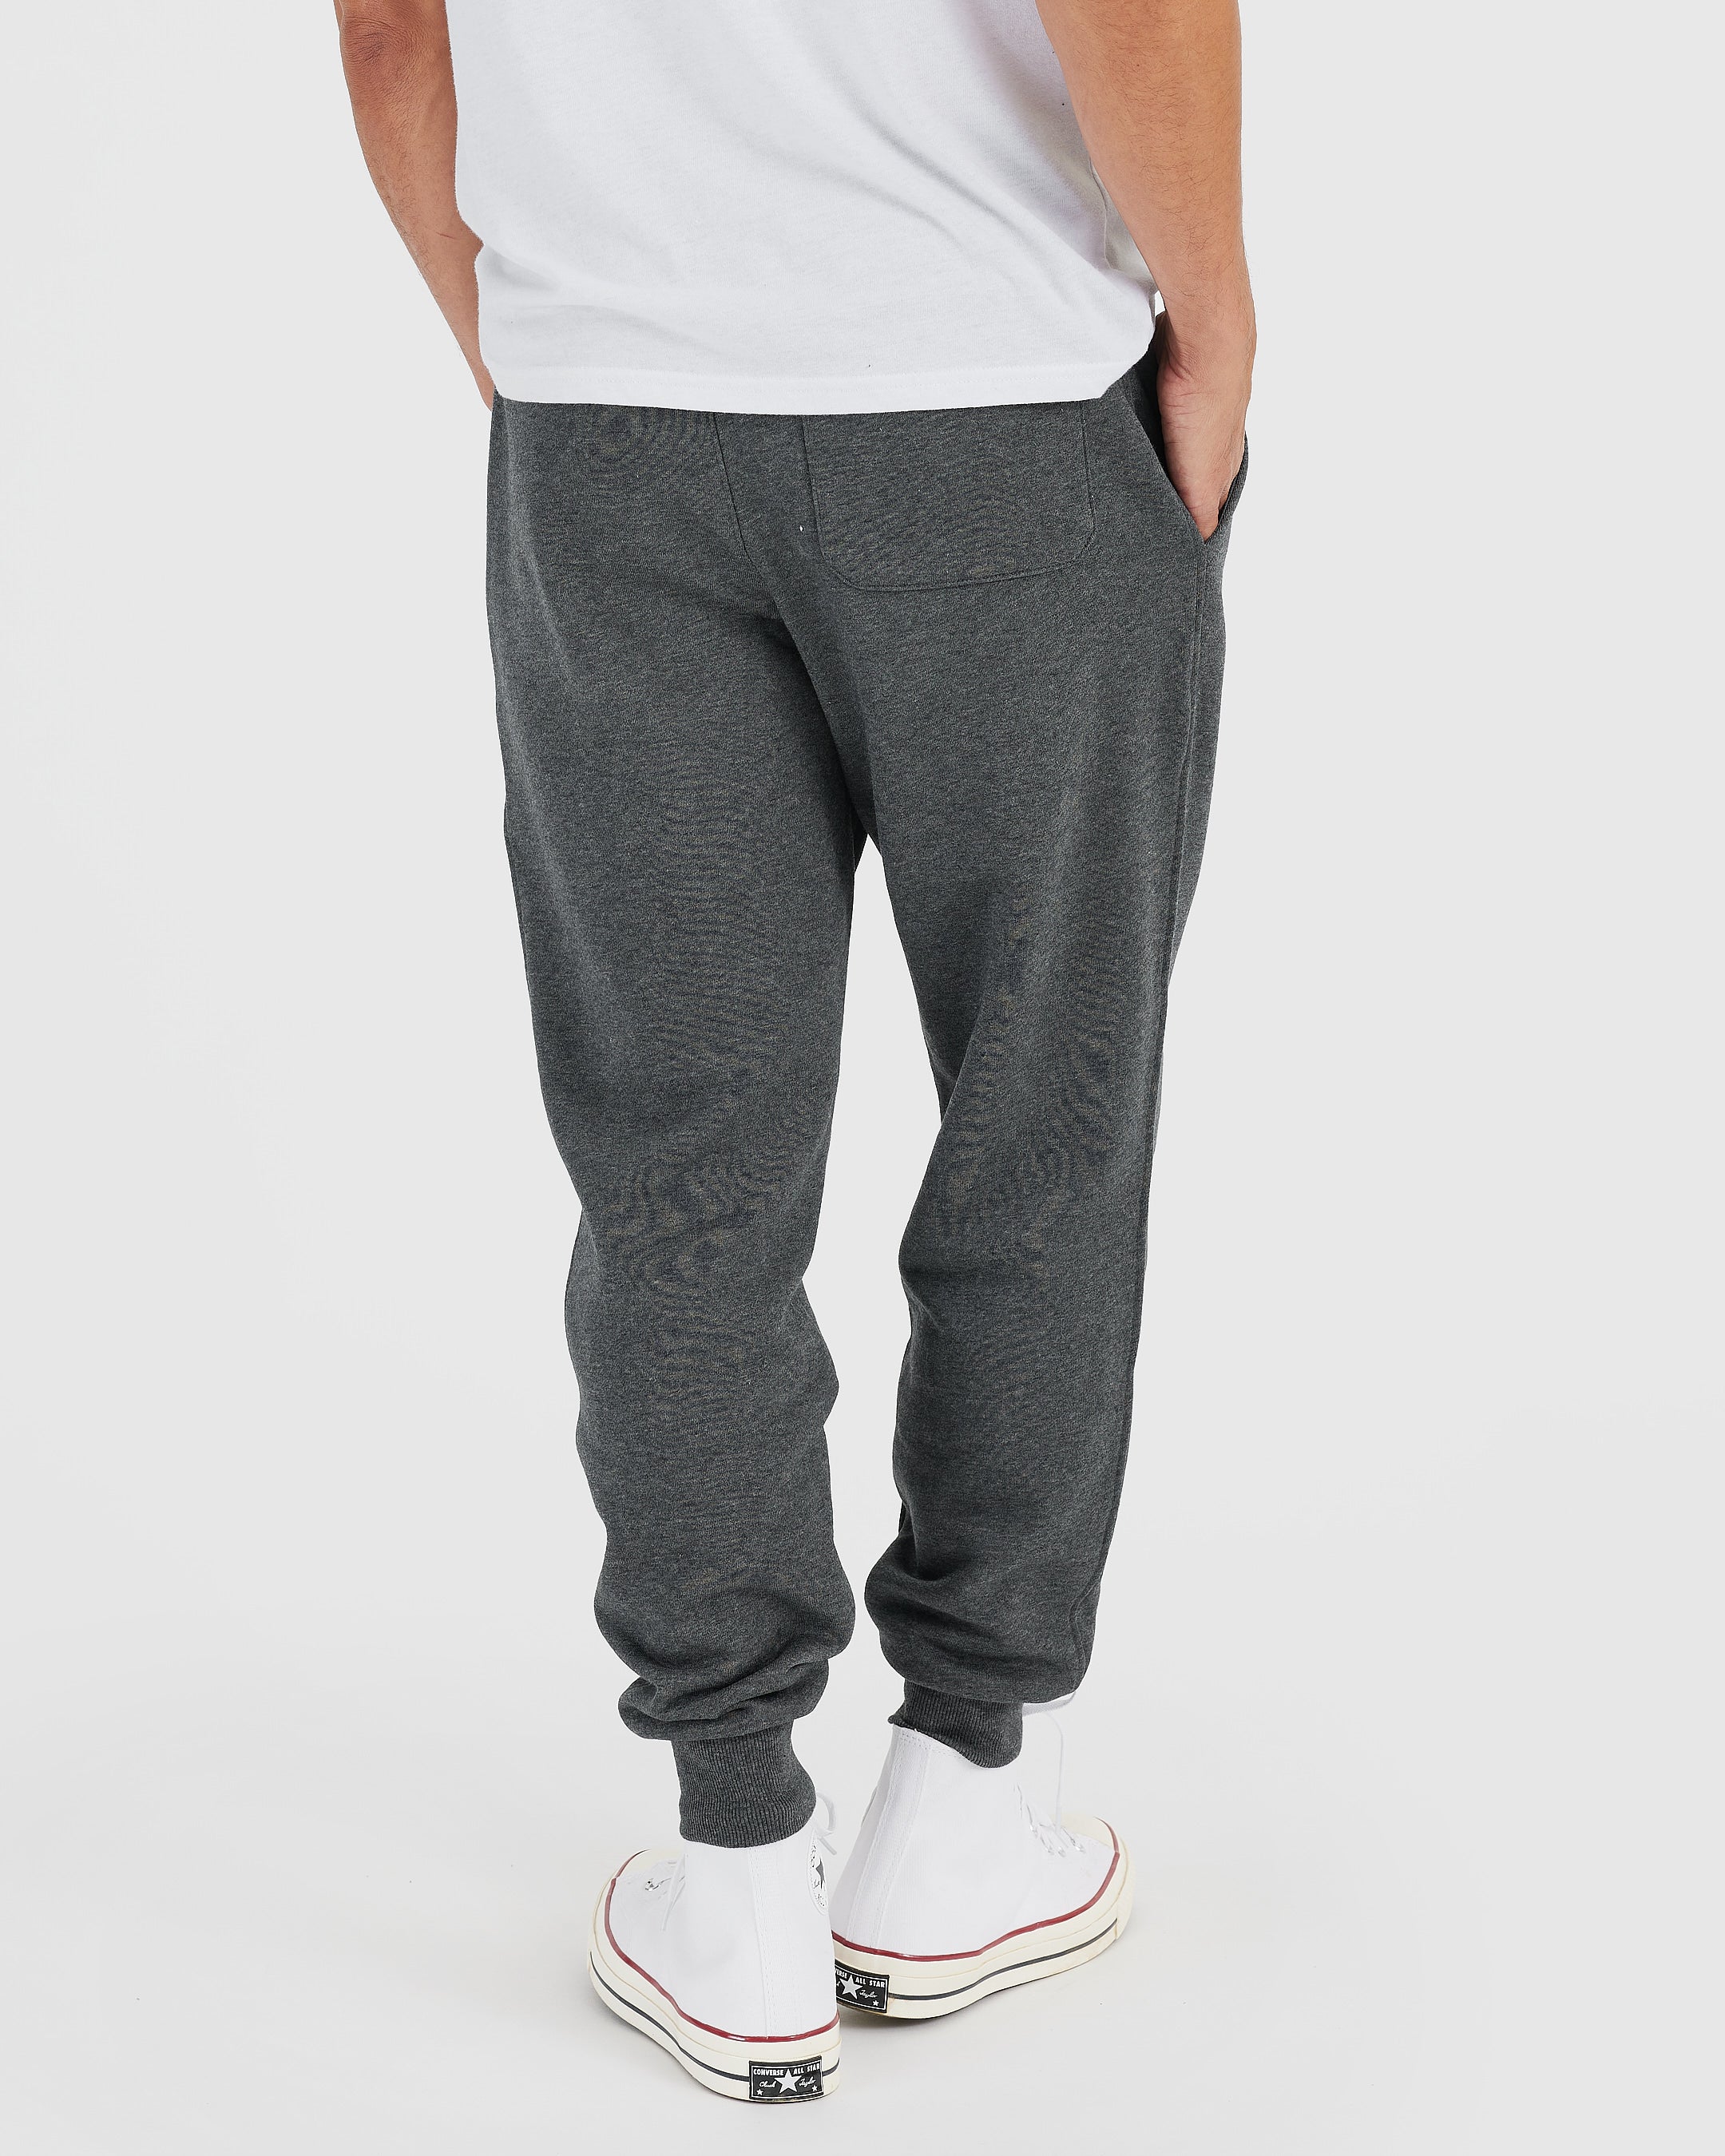 Charcoal Gray Fleece French Terry Jogger | Charcoal Gray Fleece French  Terry Jogger | True Classic